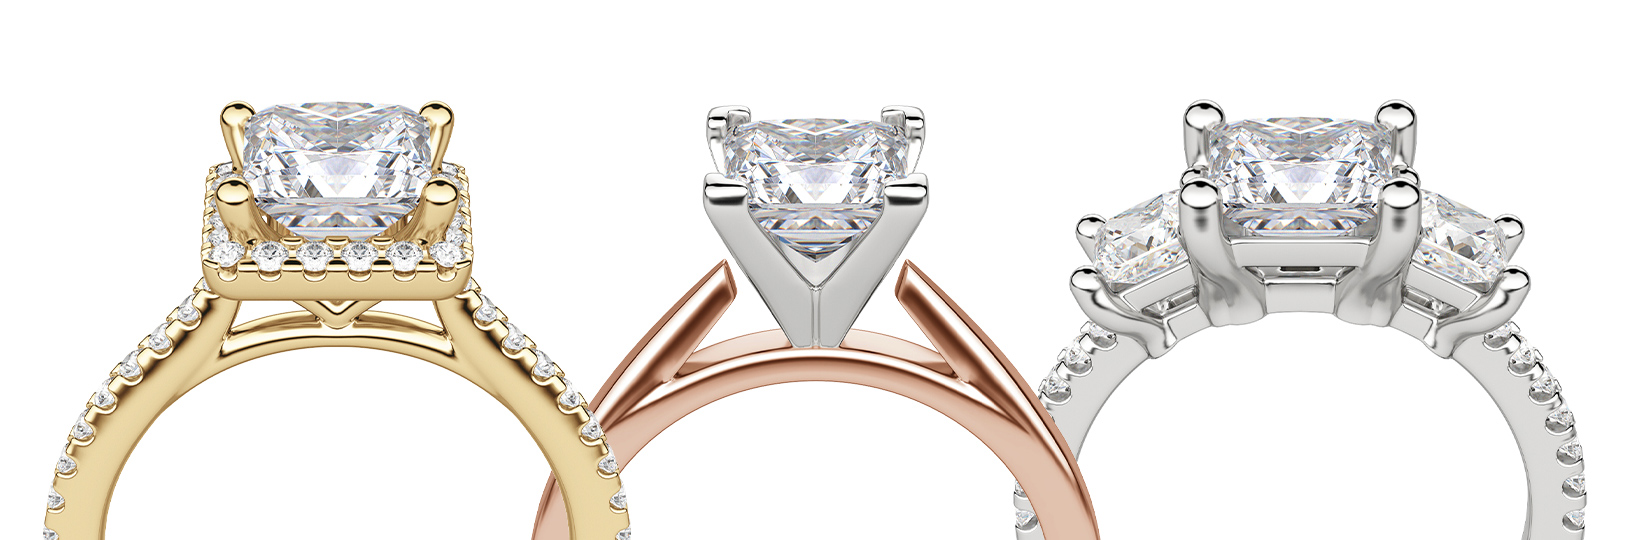 A princess cut simulated diamond featured in three different settings